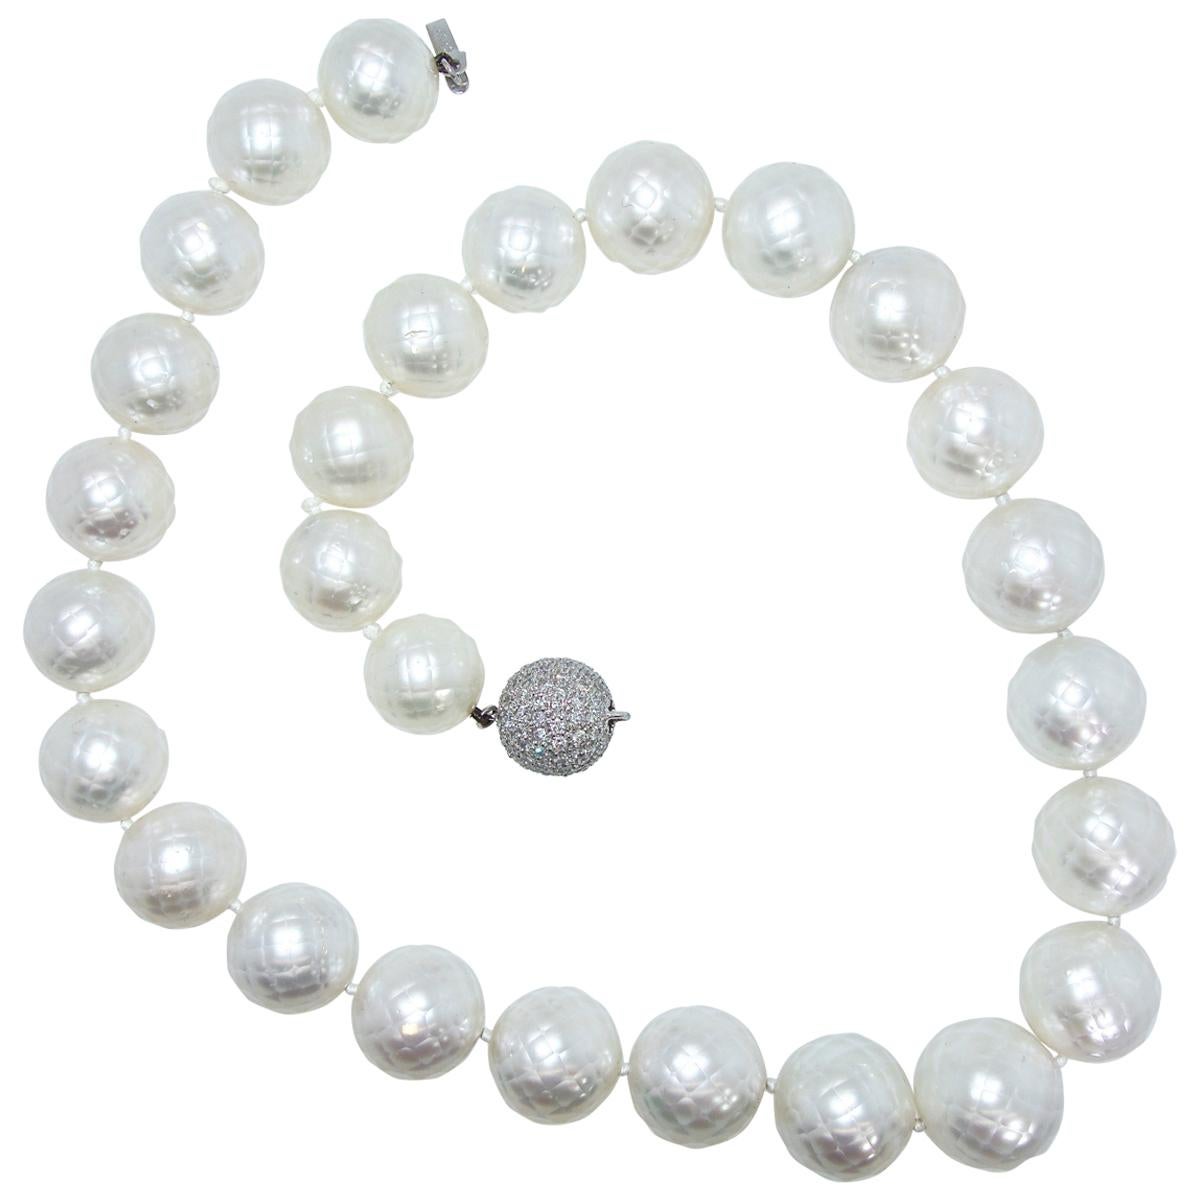 South Sea Pearls highly unusual faceted natural South Sea pearl strand, (accompanied by a certificate), 30 in count (two are included but not strung), these fine pearls display a deep nacre which makes each pearl luminous.  They range from 14 up to